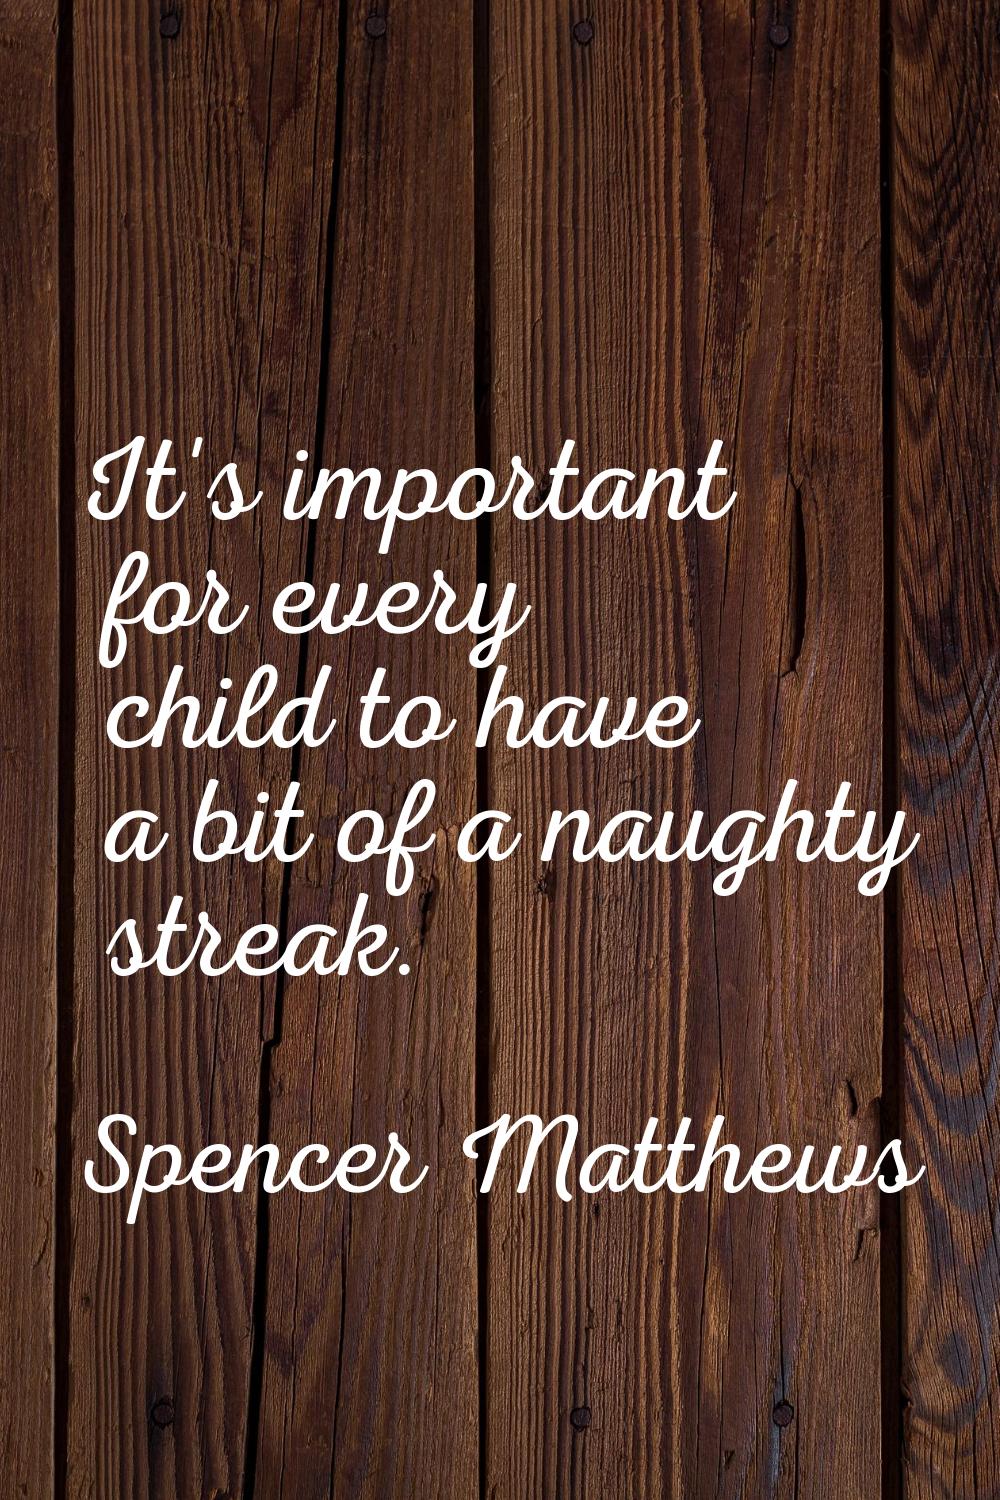 It's important for every child to have a bit of a naughty streak.